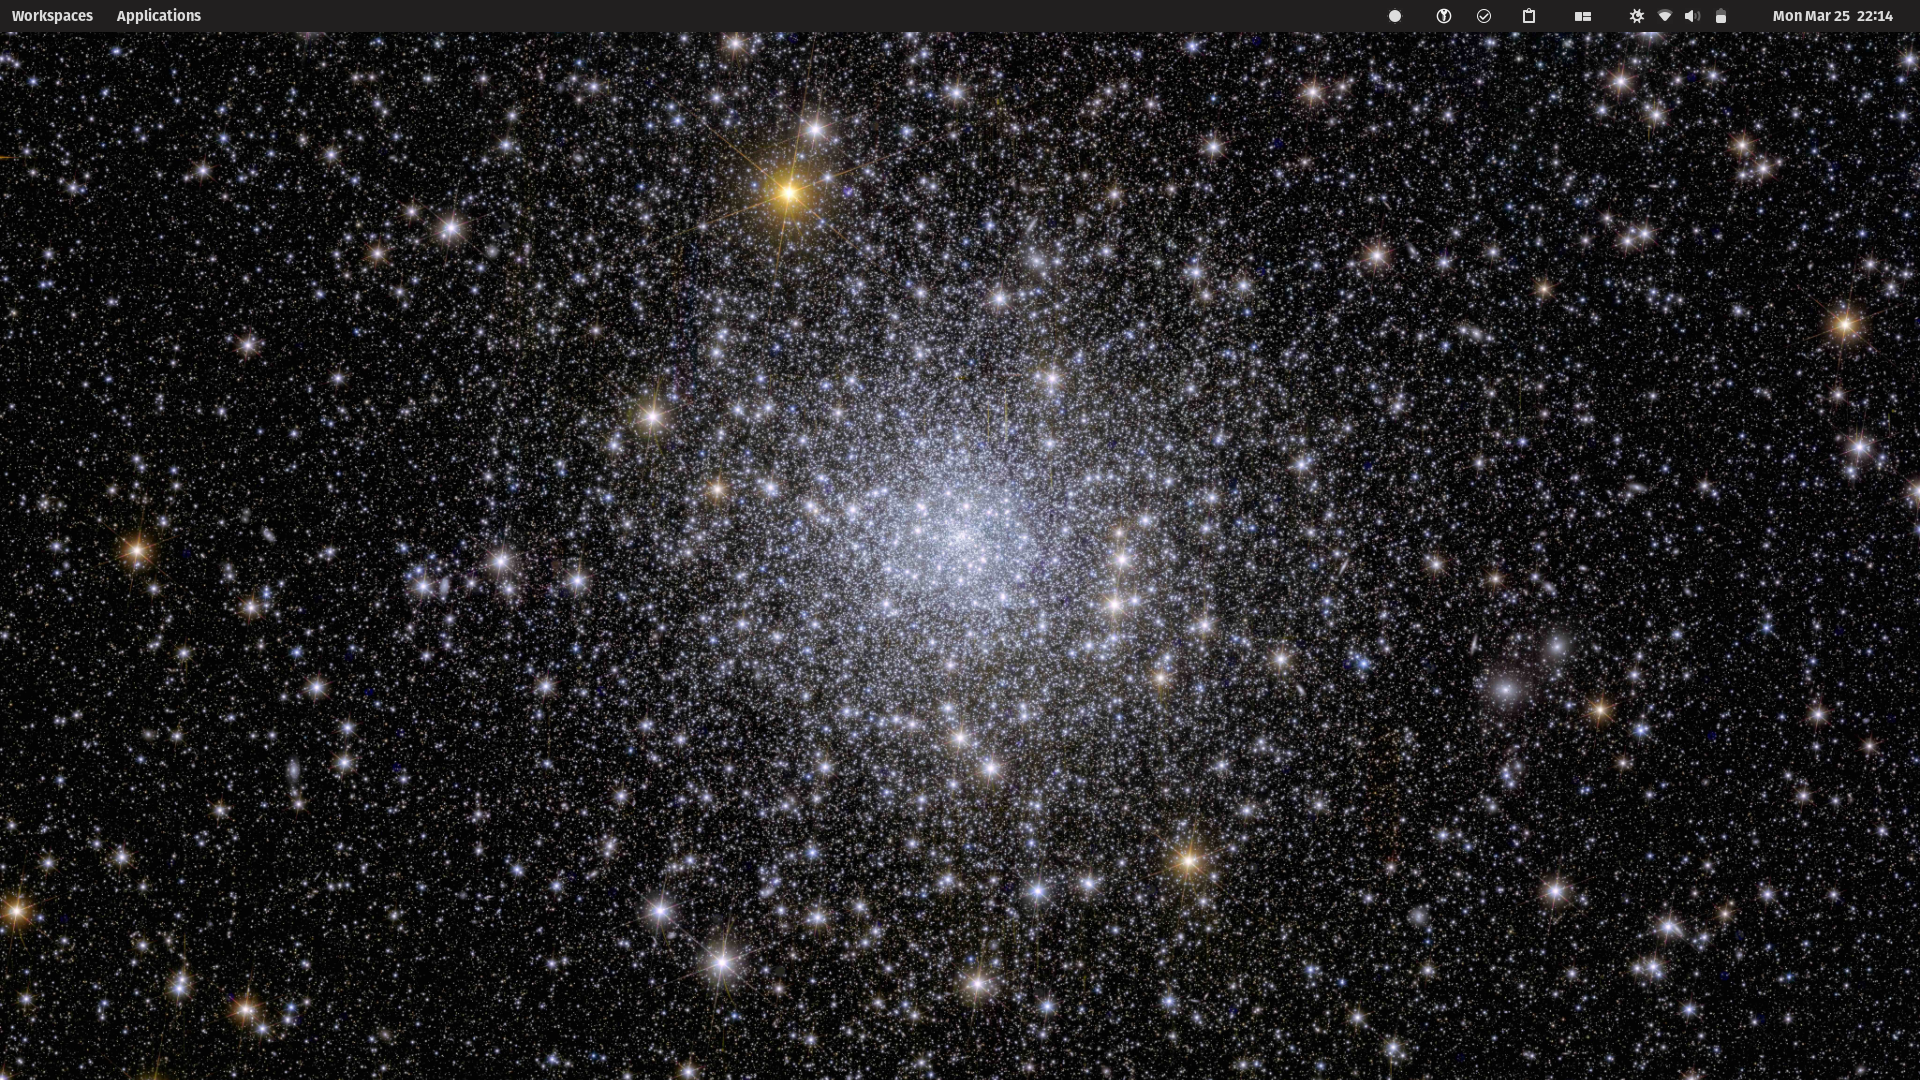 Empty desktop with a background image of a star cluster